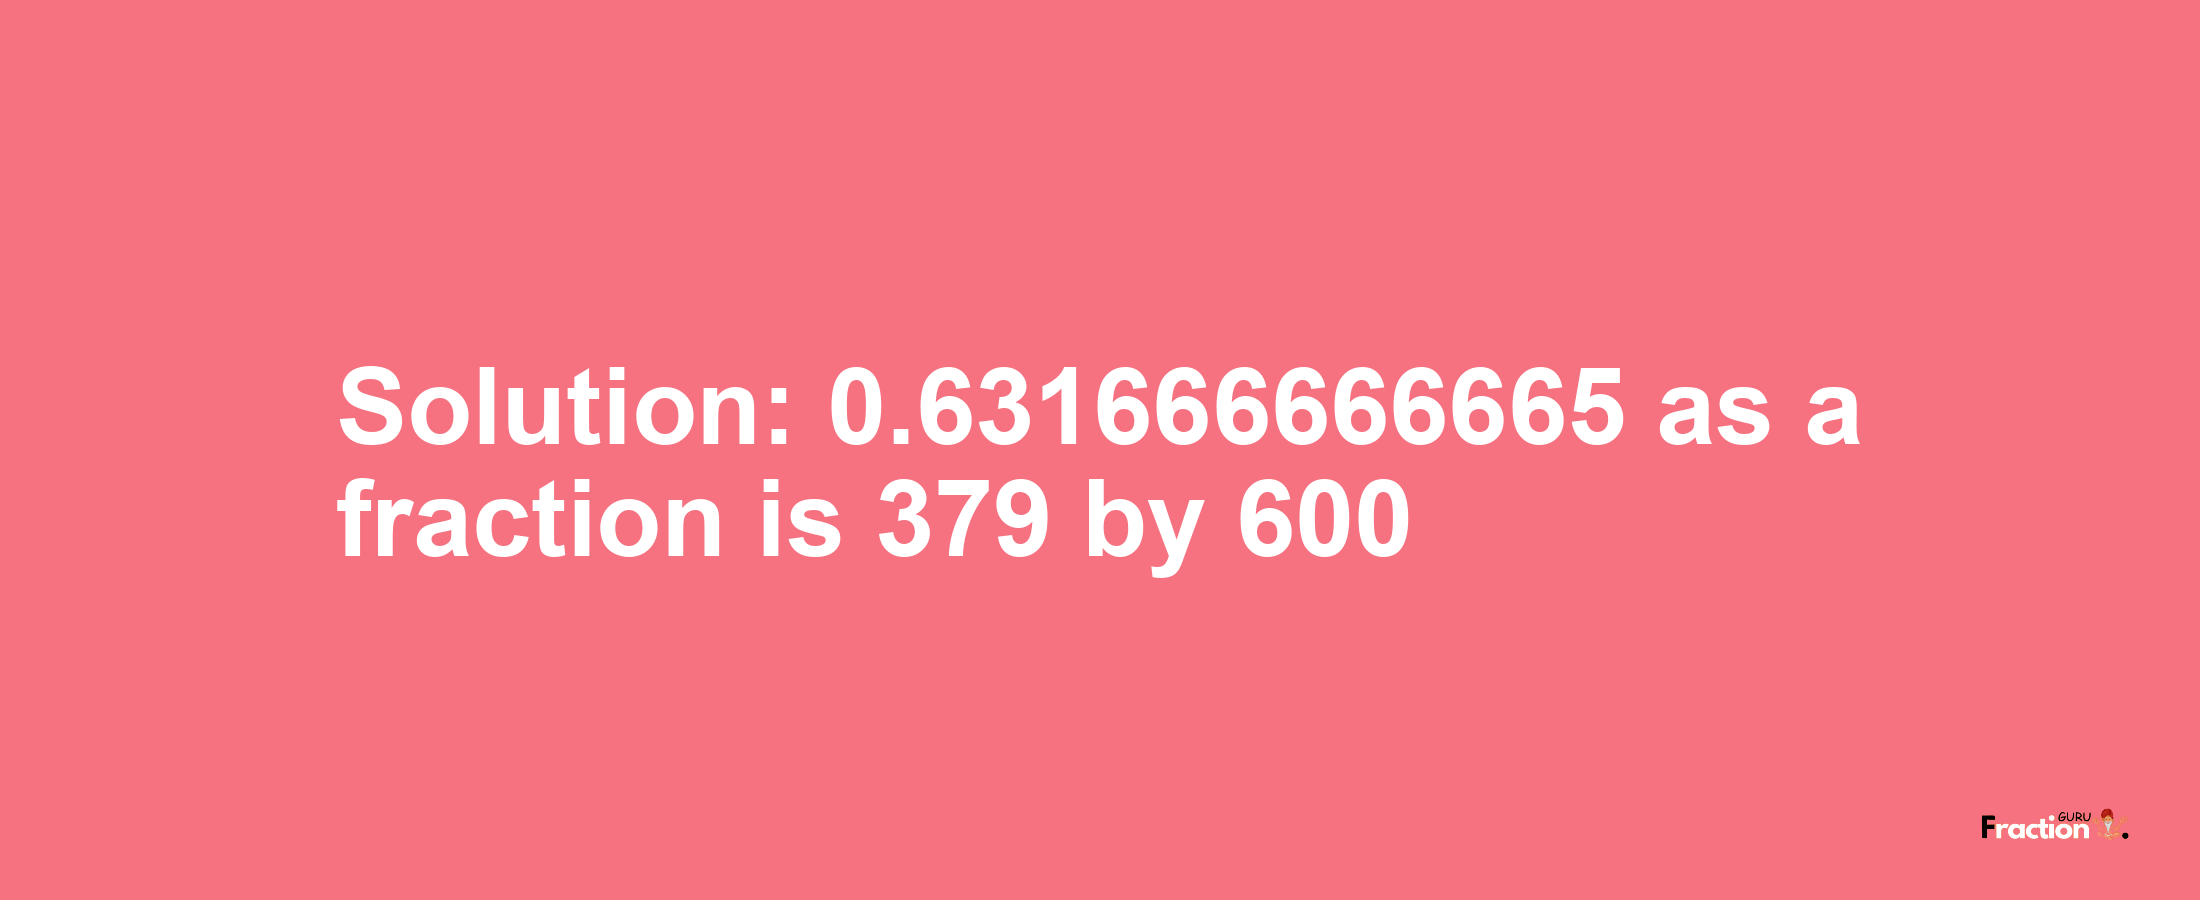 Solution:0.631666666665 as a fraction is 379/600